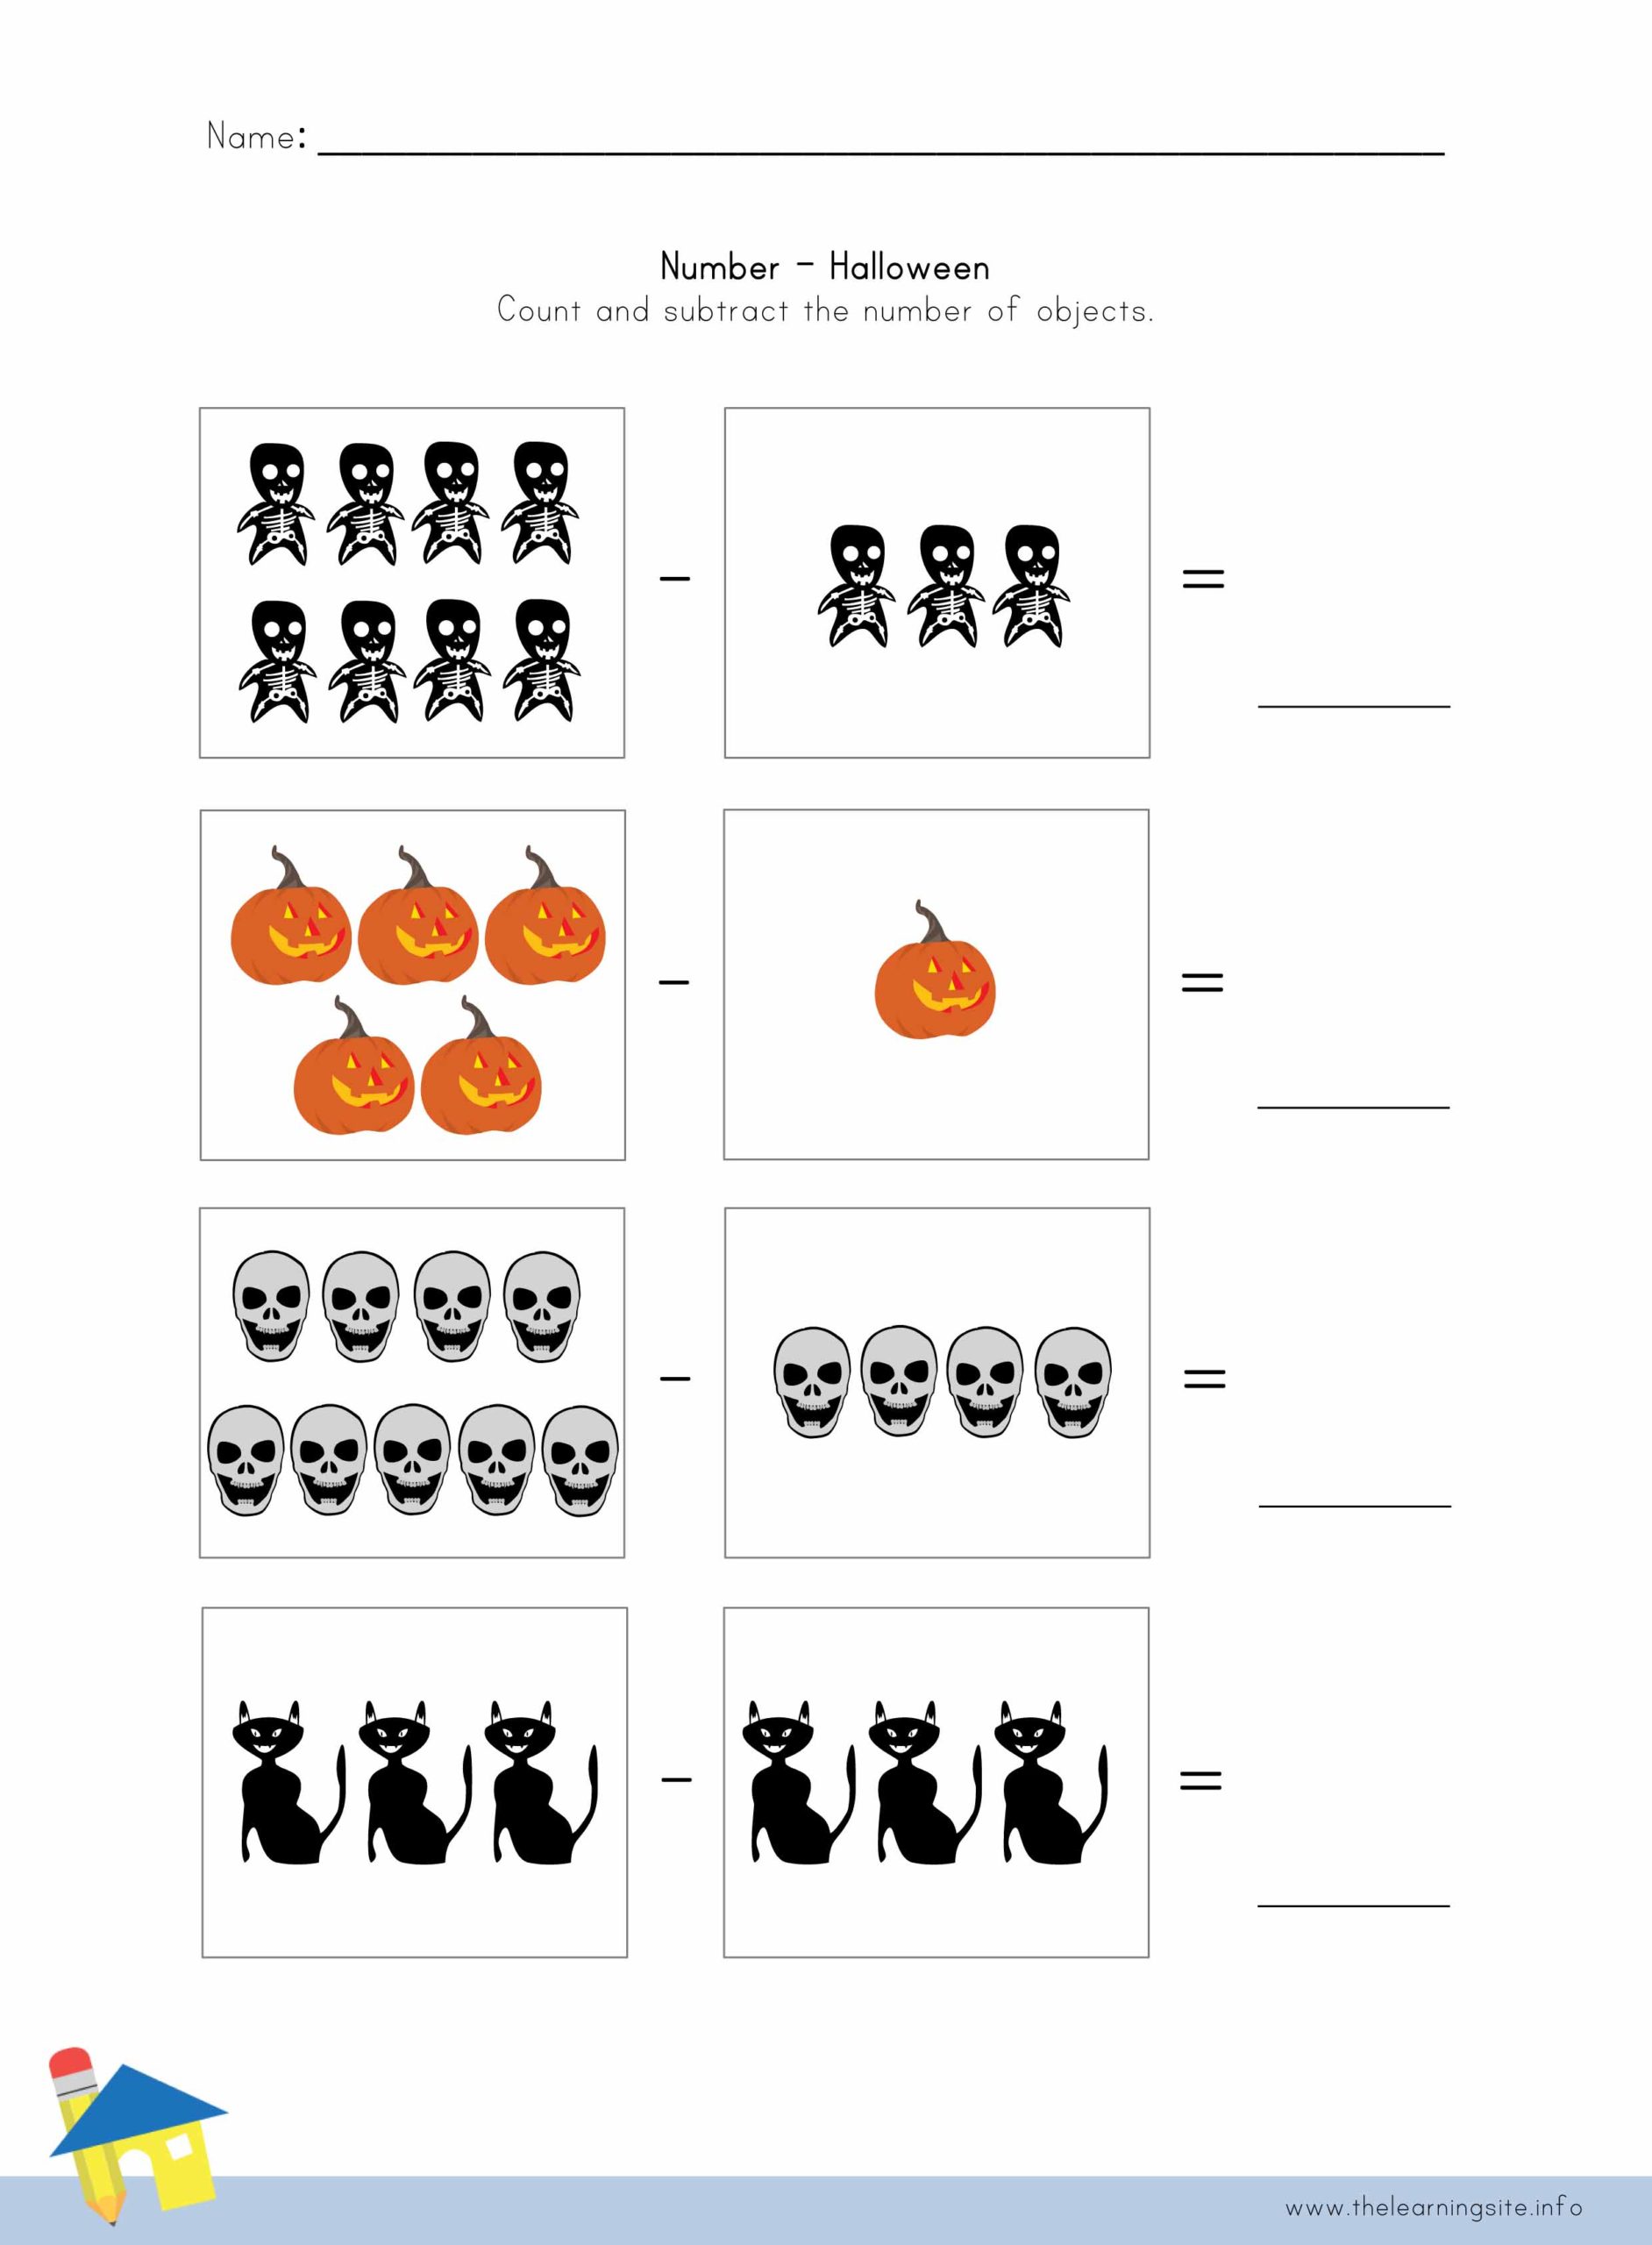 halloween-number-worksheet-3-the-learning-site